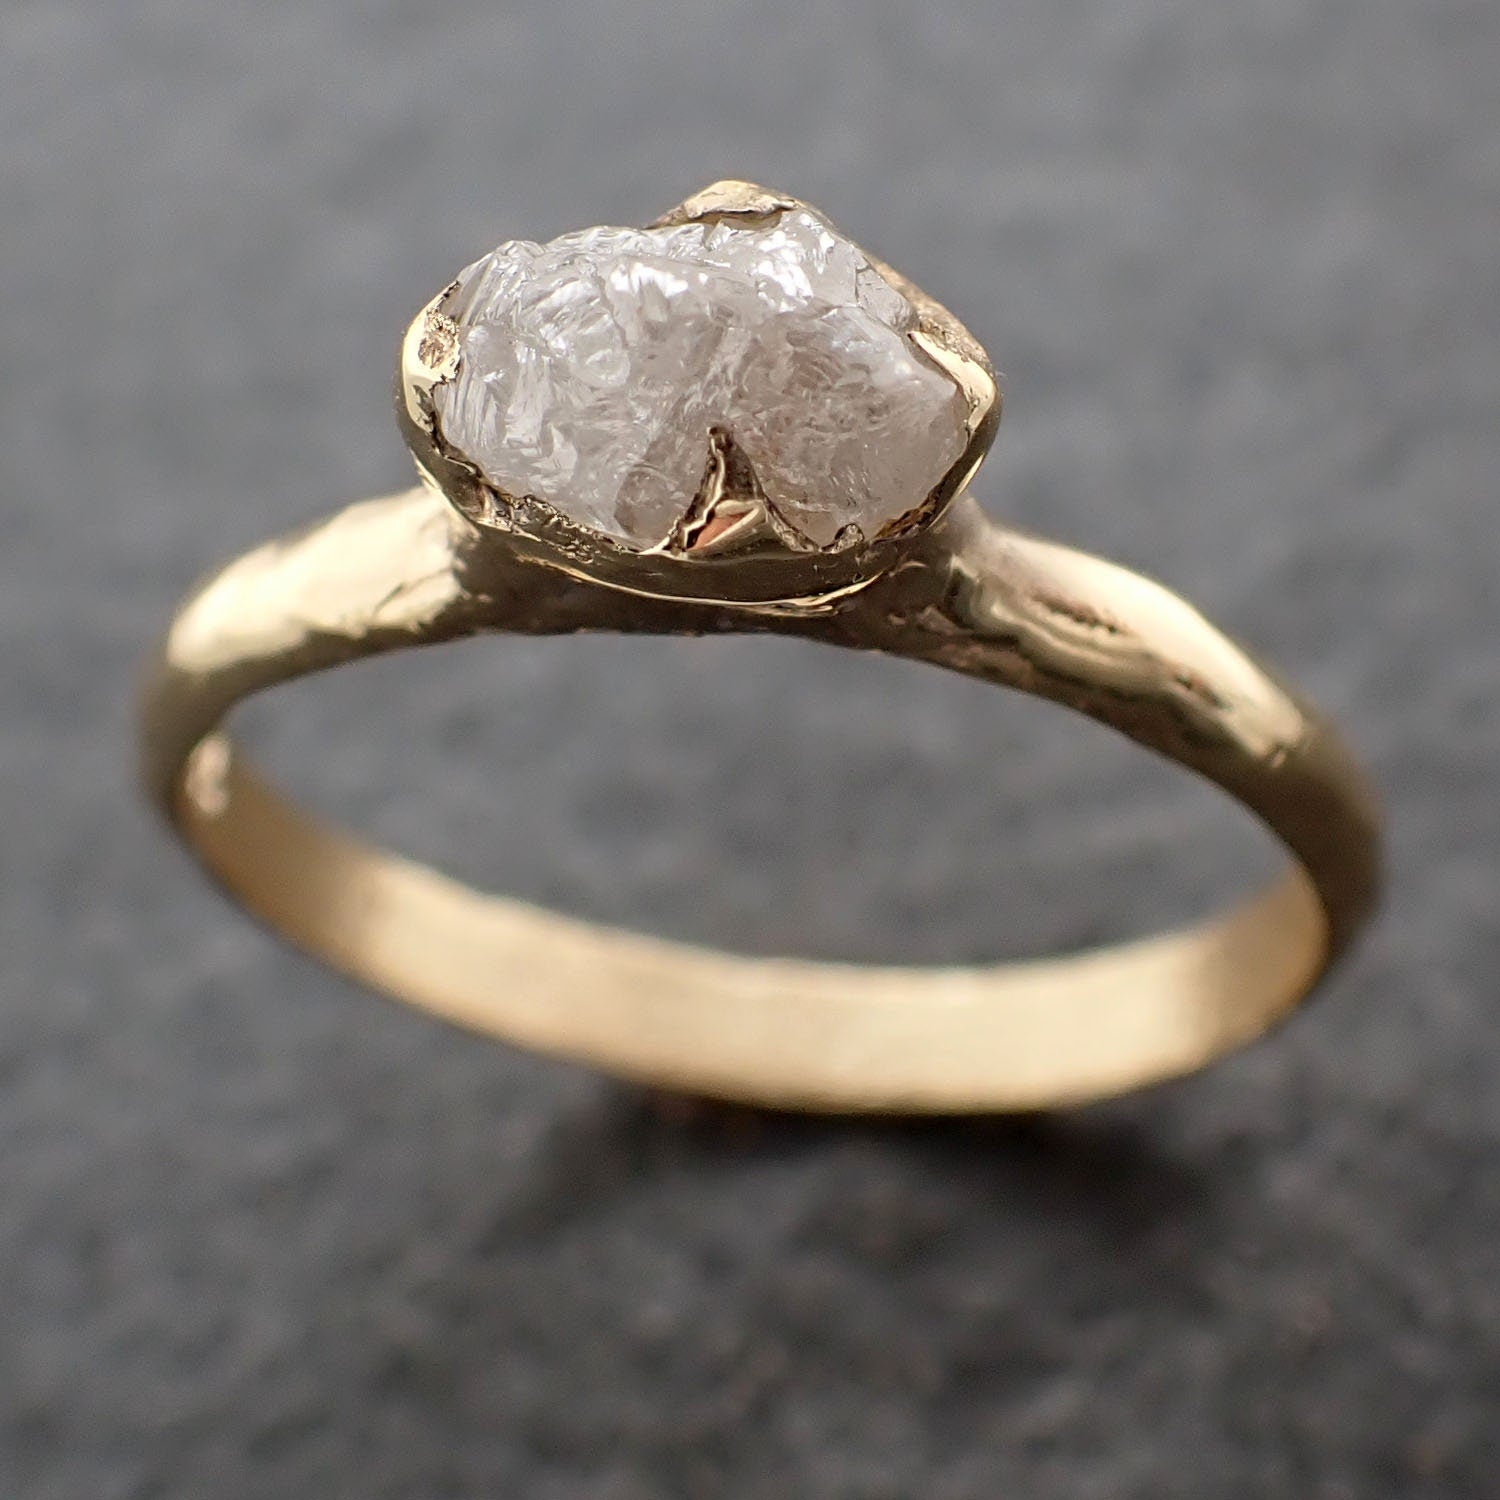 Raw Diamond Engagement Ring Rough Uncut Diamond Solitaire Recycled 14k yellow gold Conflict Free Diamond Wedding Promise 3075